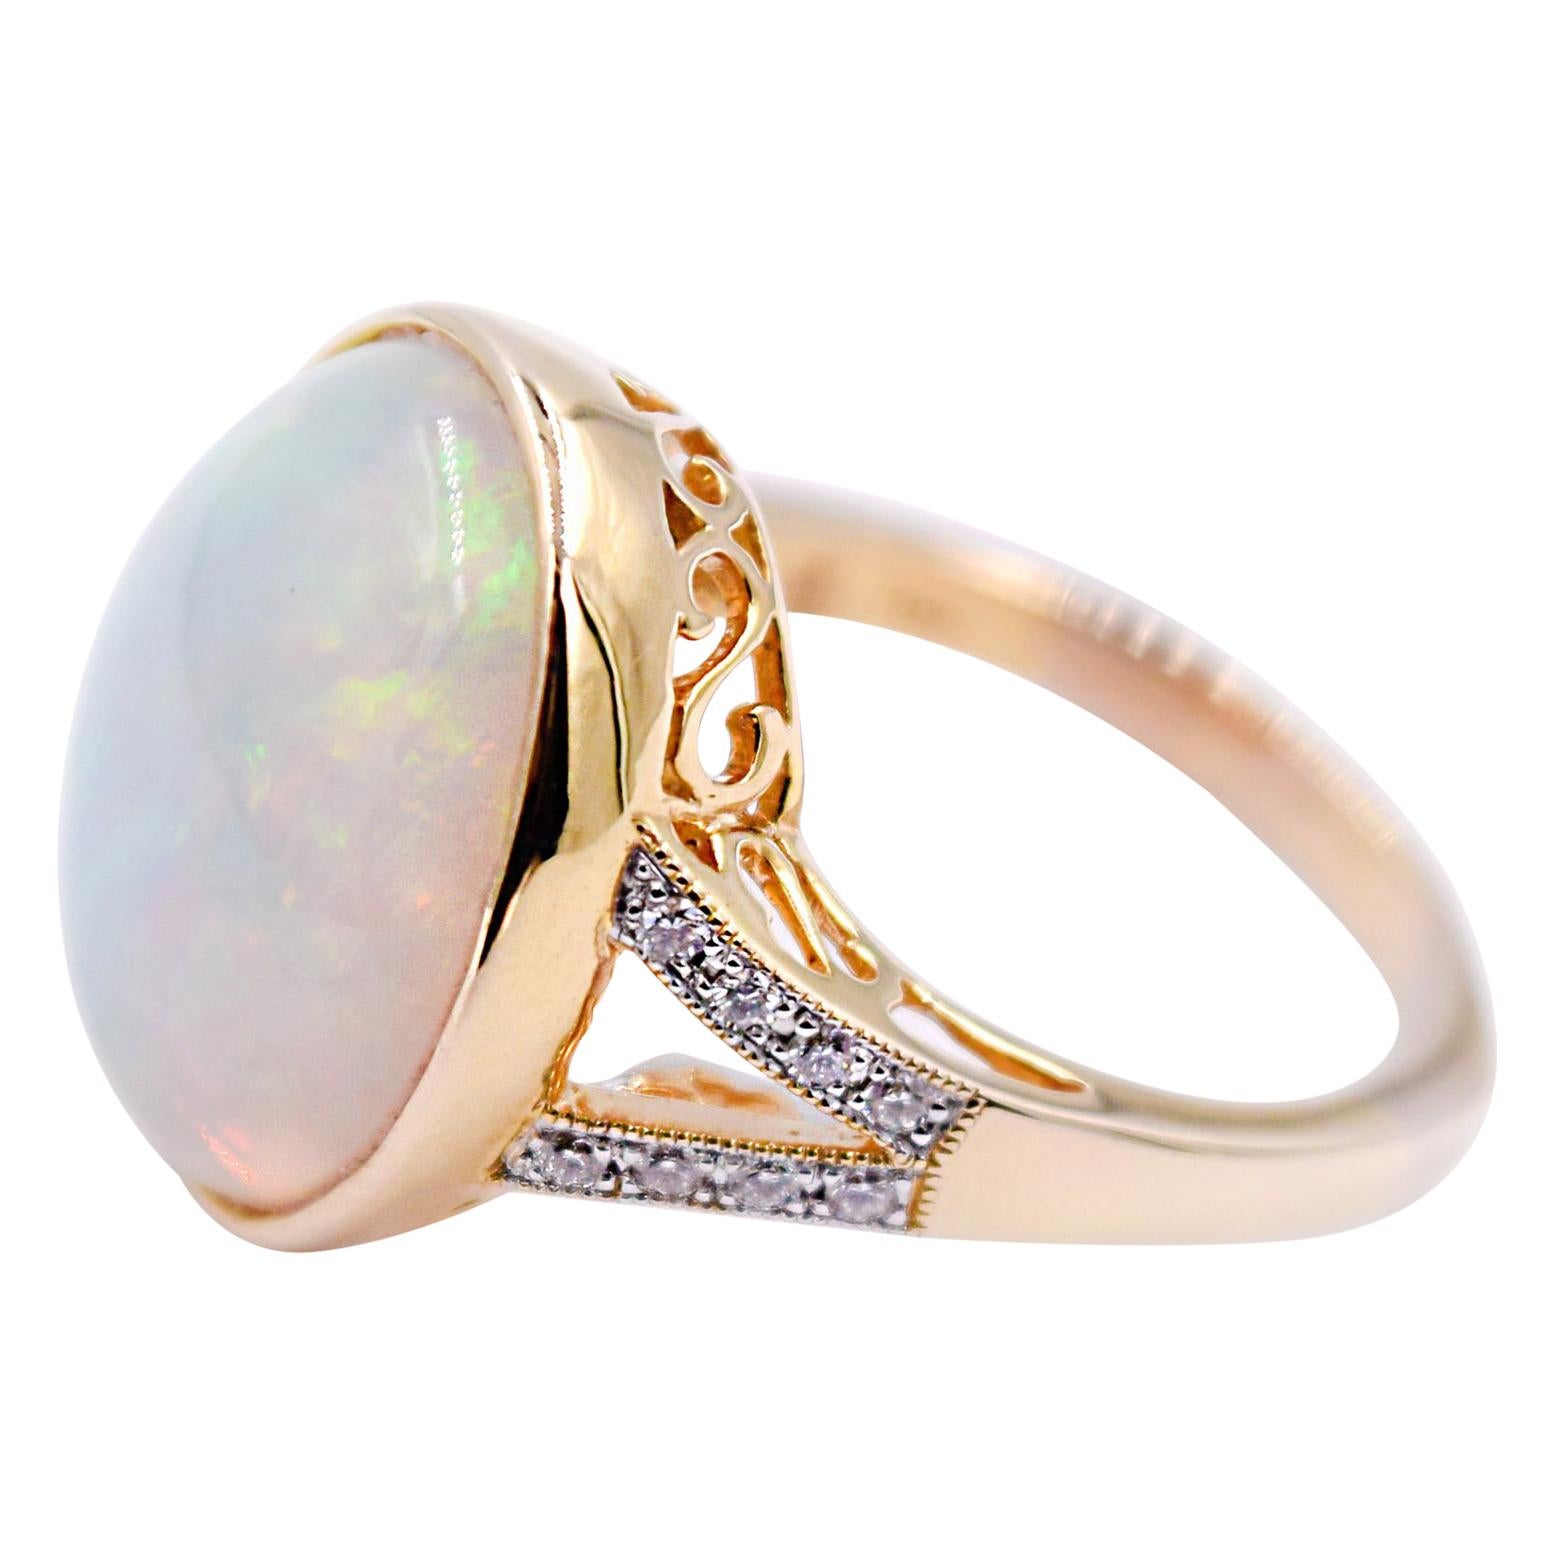 8.09 Carat Ethiopian Opal and White Diamond Statement Ring in 14 Karat Gold For Sale